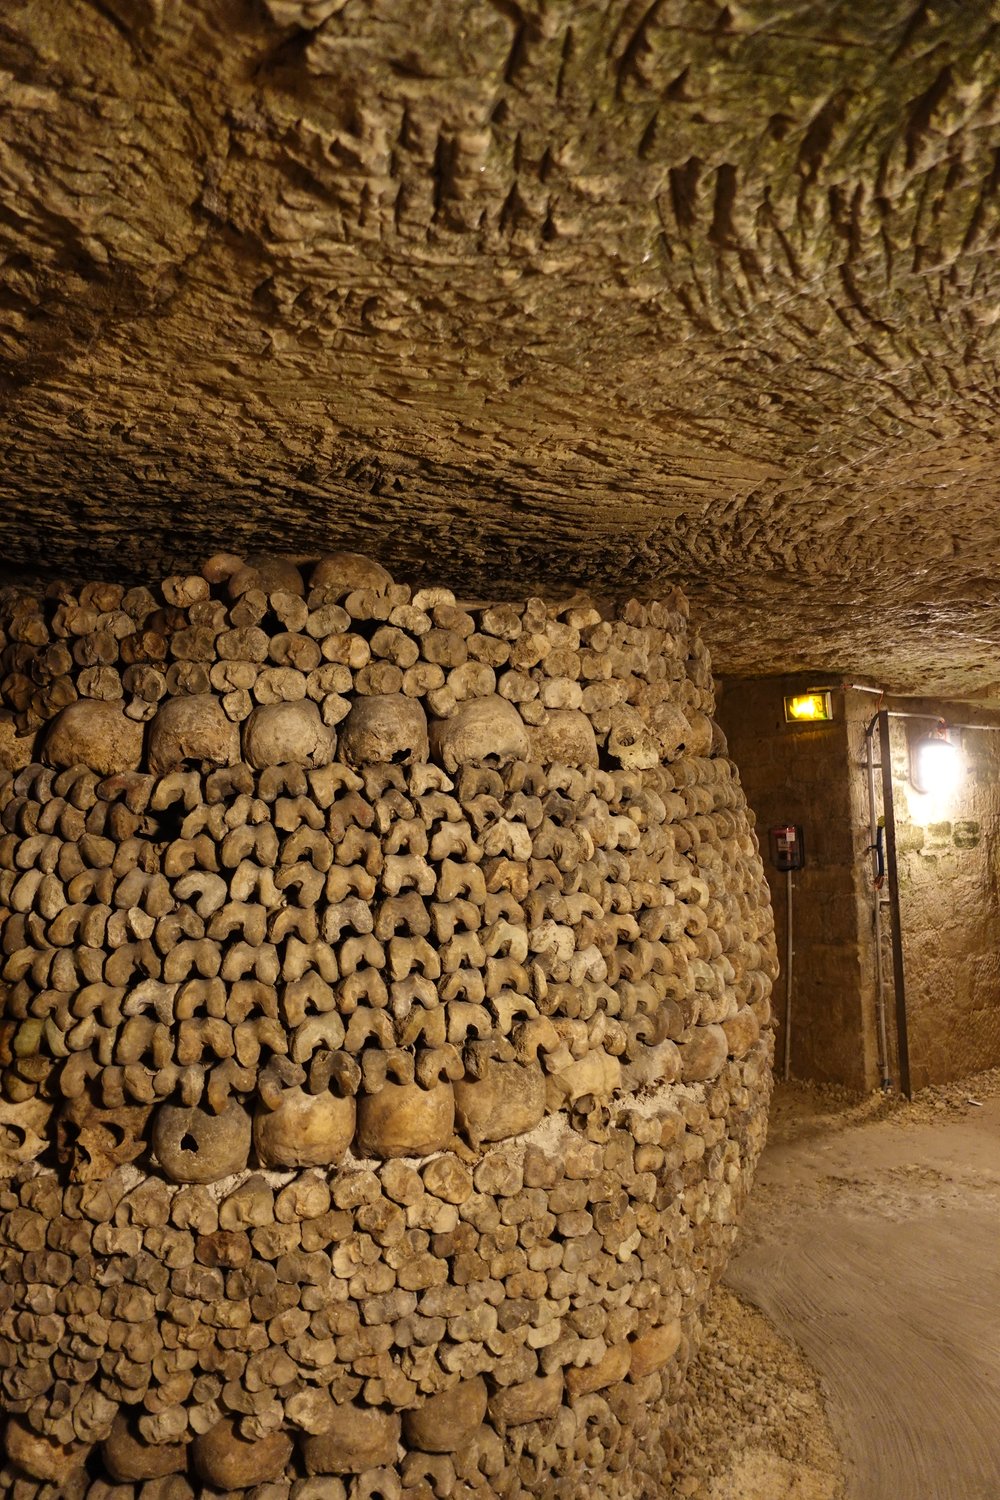 Views from Paris Catacombs